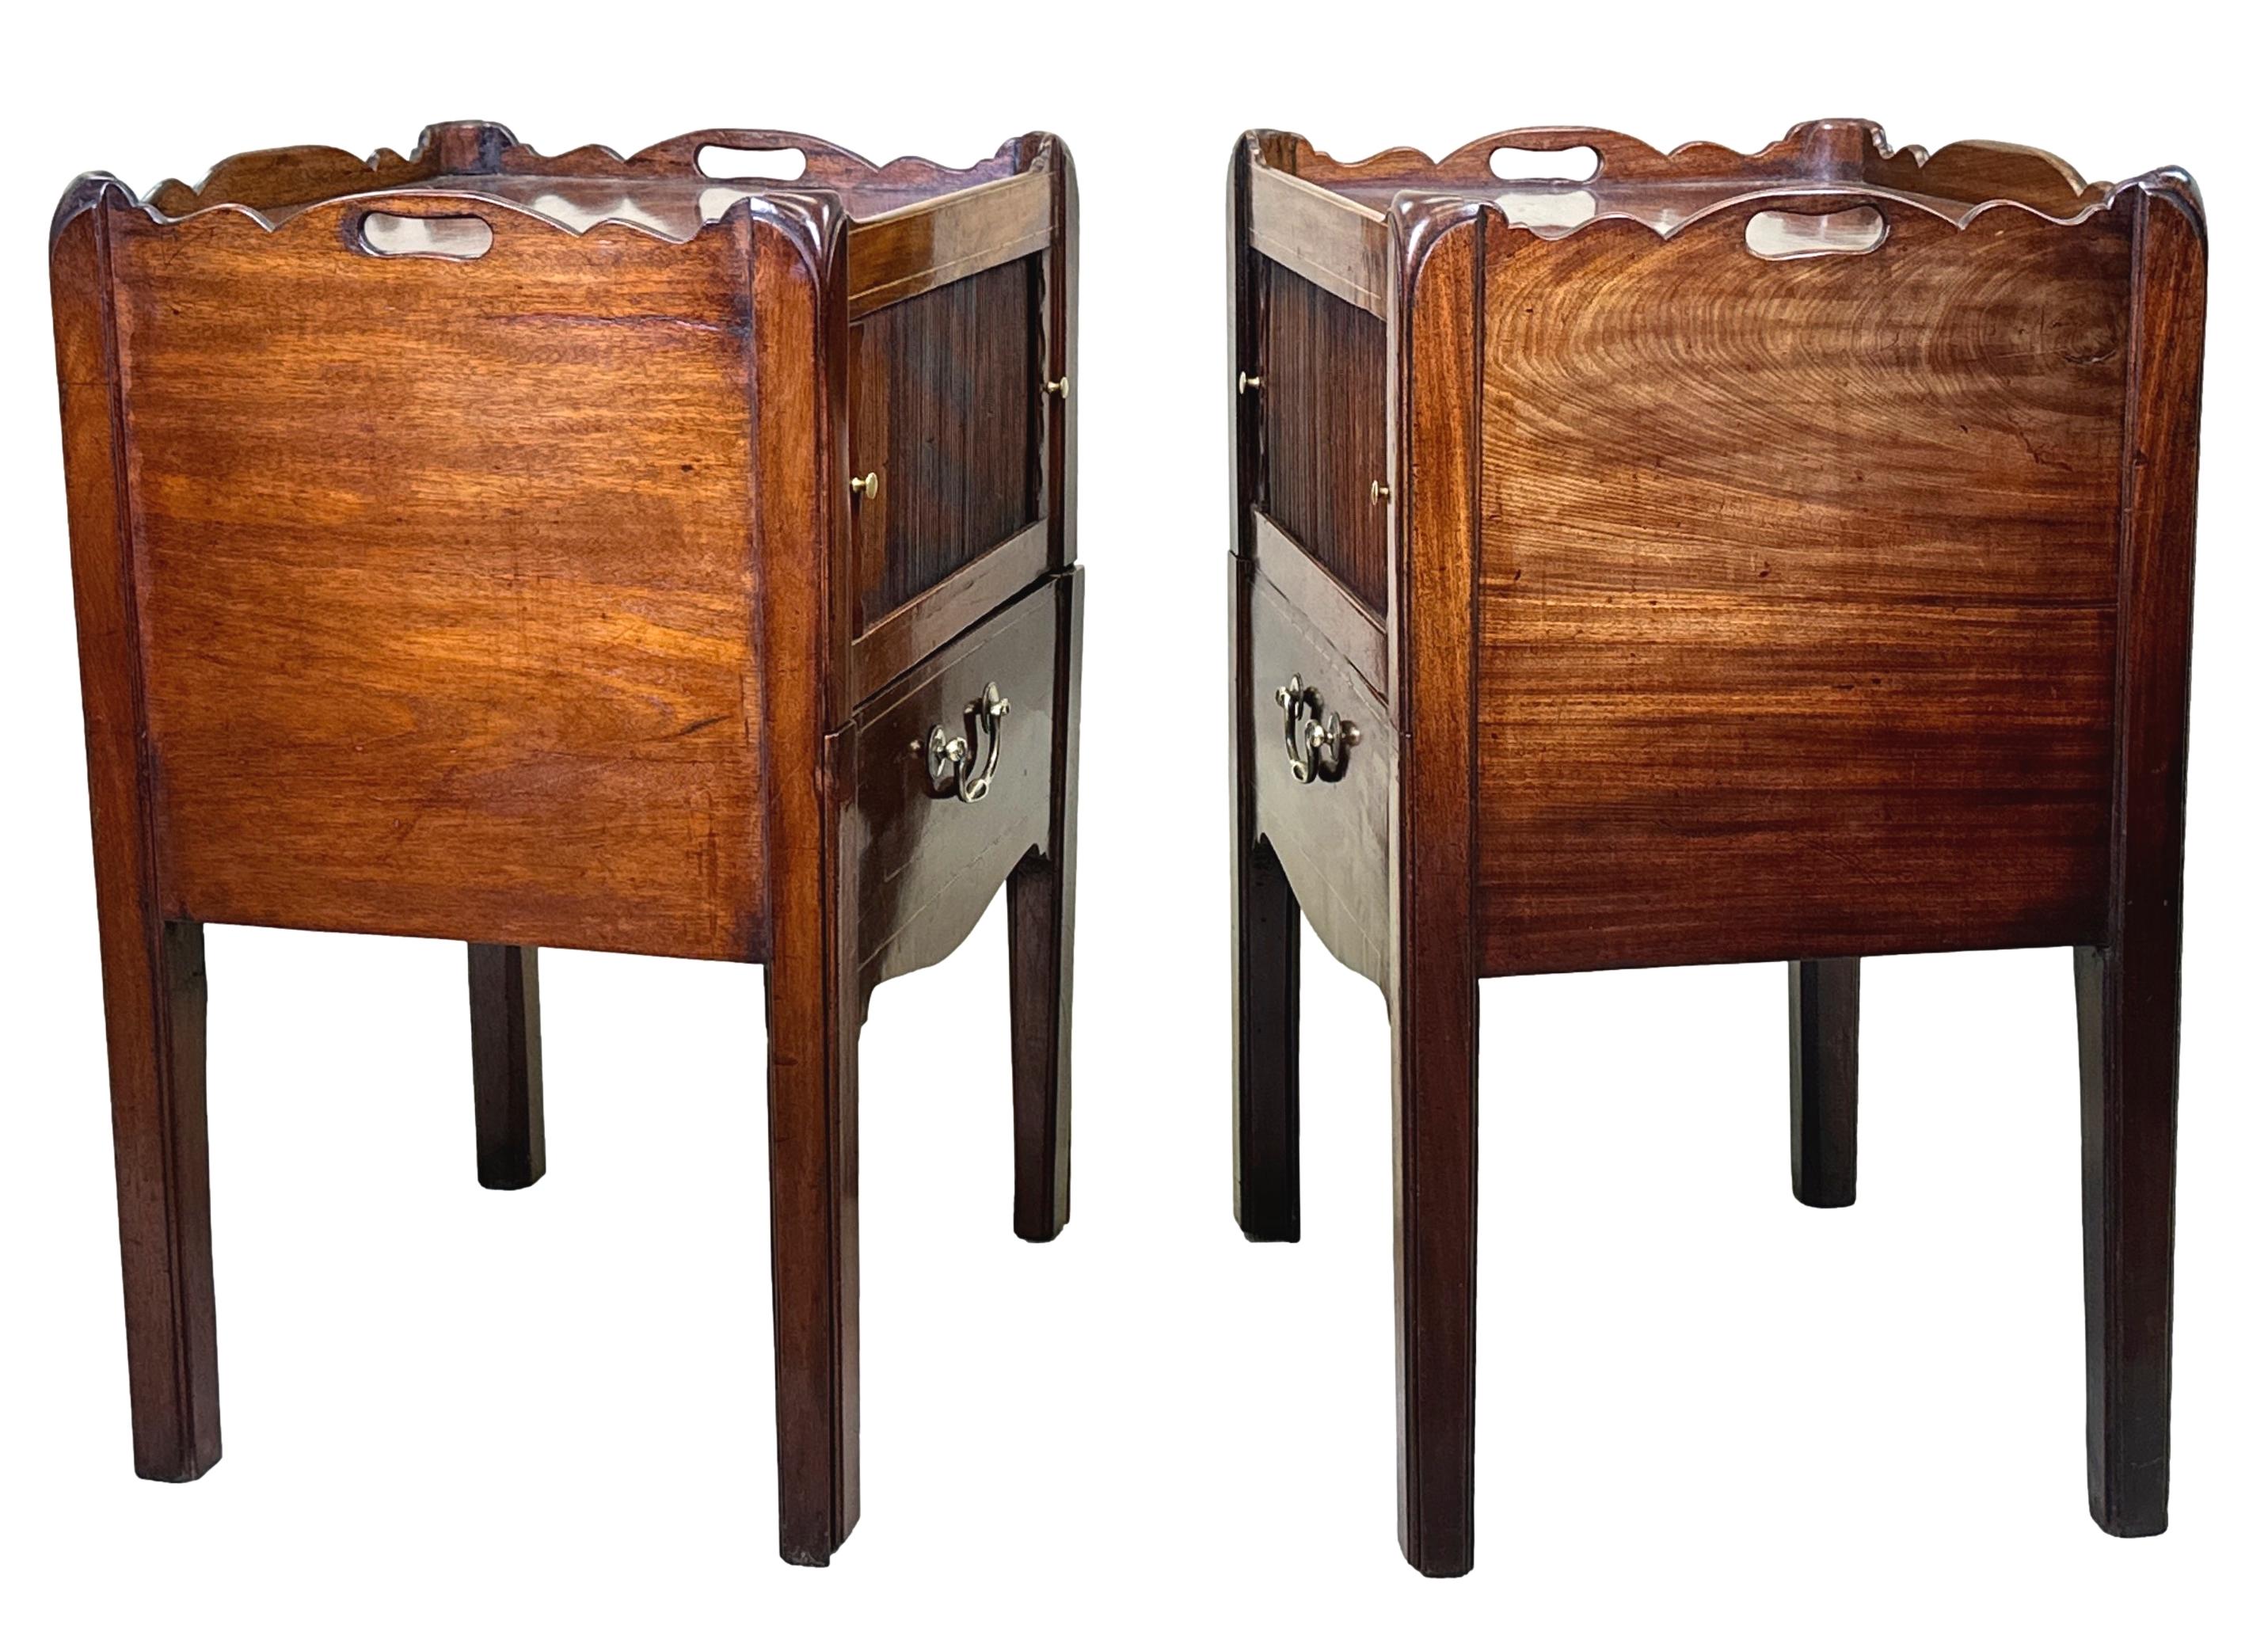 A Very Good Quality And Extremely Well Matched Pair Of 18th Century, George III Period, Mahogany Bedside Night Tables, Or Tray Top Commodes, Having Elegant Shaped Sides & Pierced Handles To Galleried Tops, Over Attractive Tambour Doors And Converted